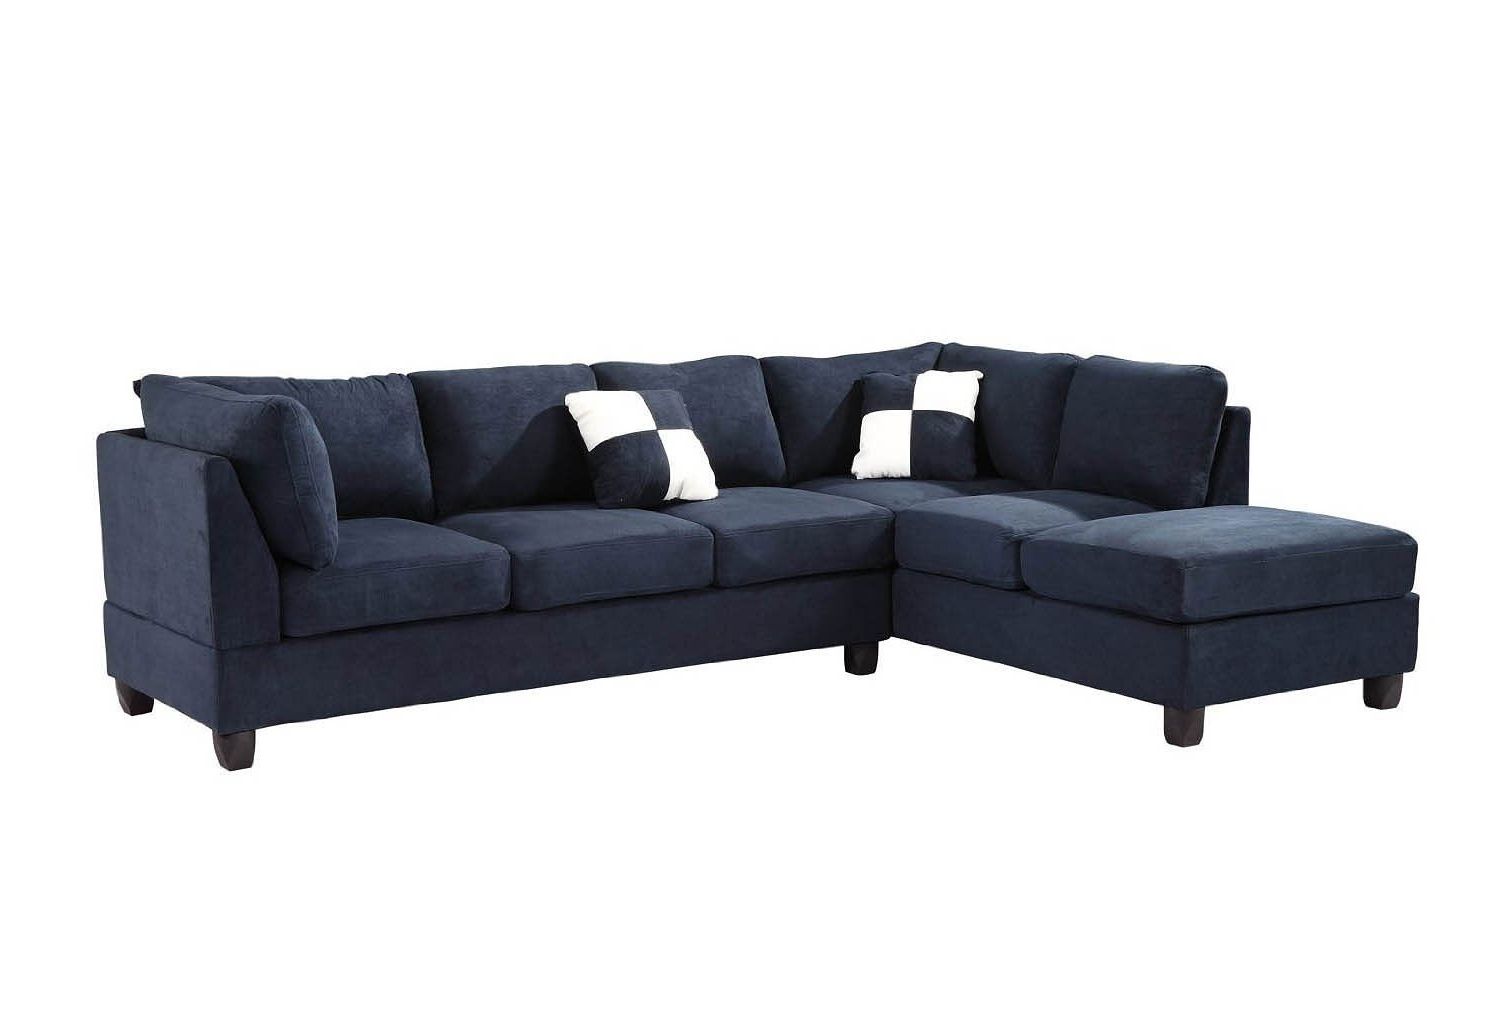 G630 Reversible Sectional Set (navy Blue) – Living Room Sets Within Most Current Sofas With Reversible Chaise Lounge (View 10 of 15)